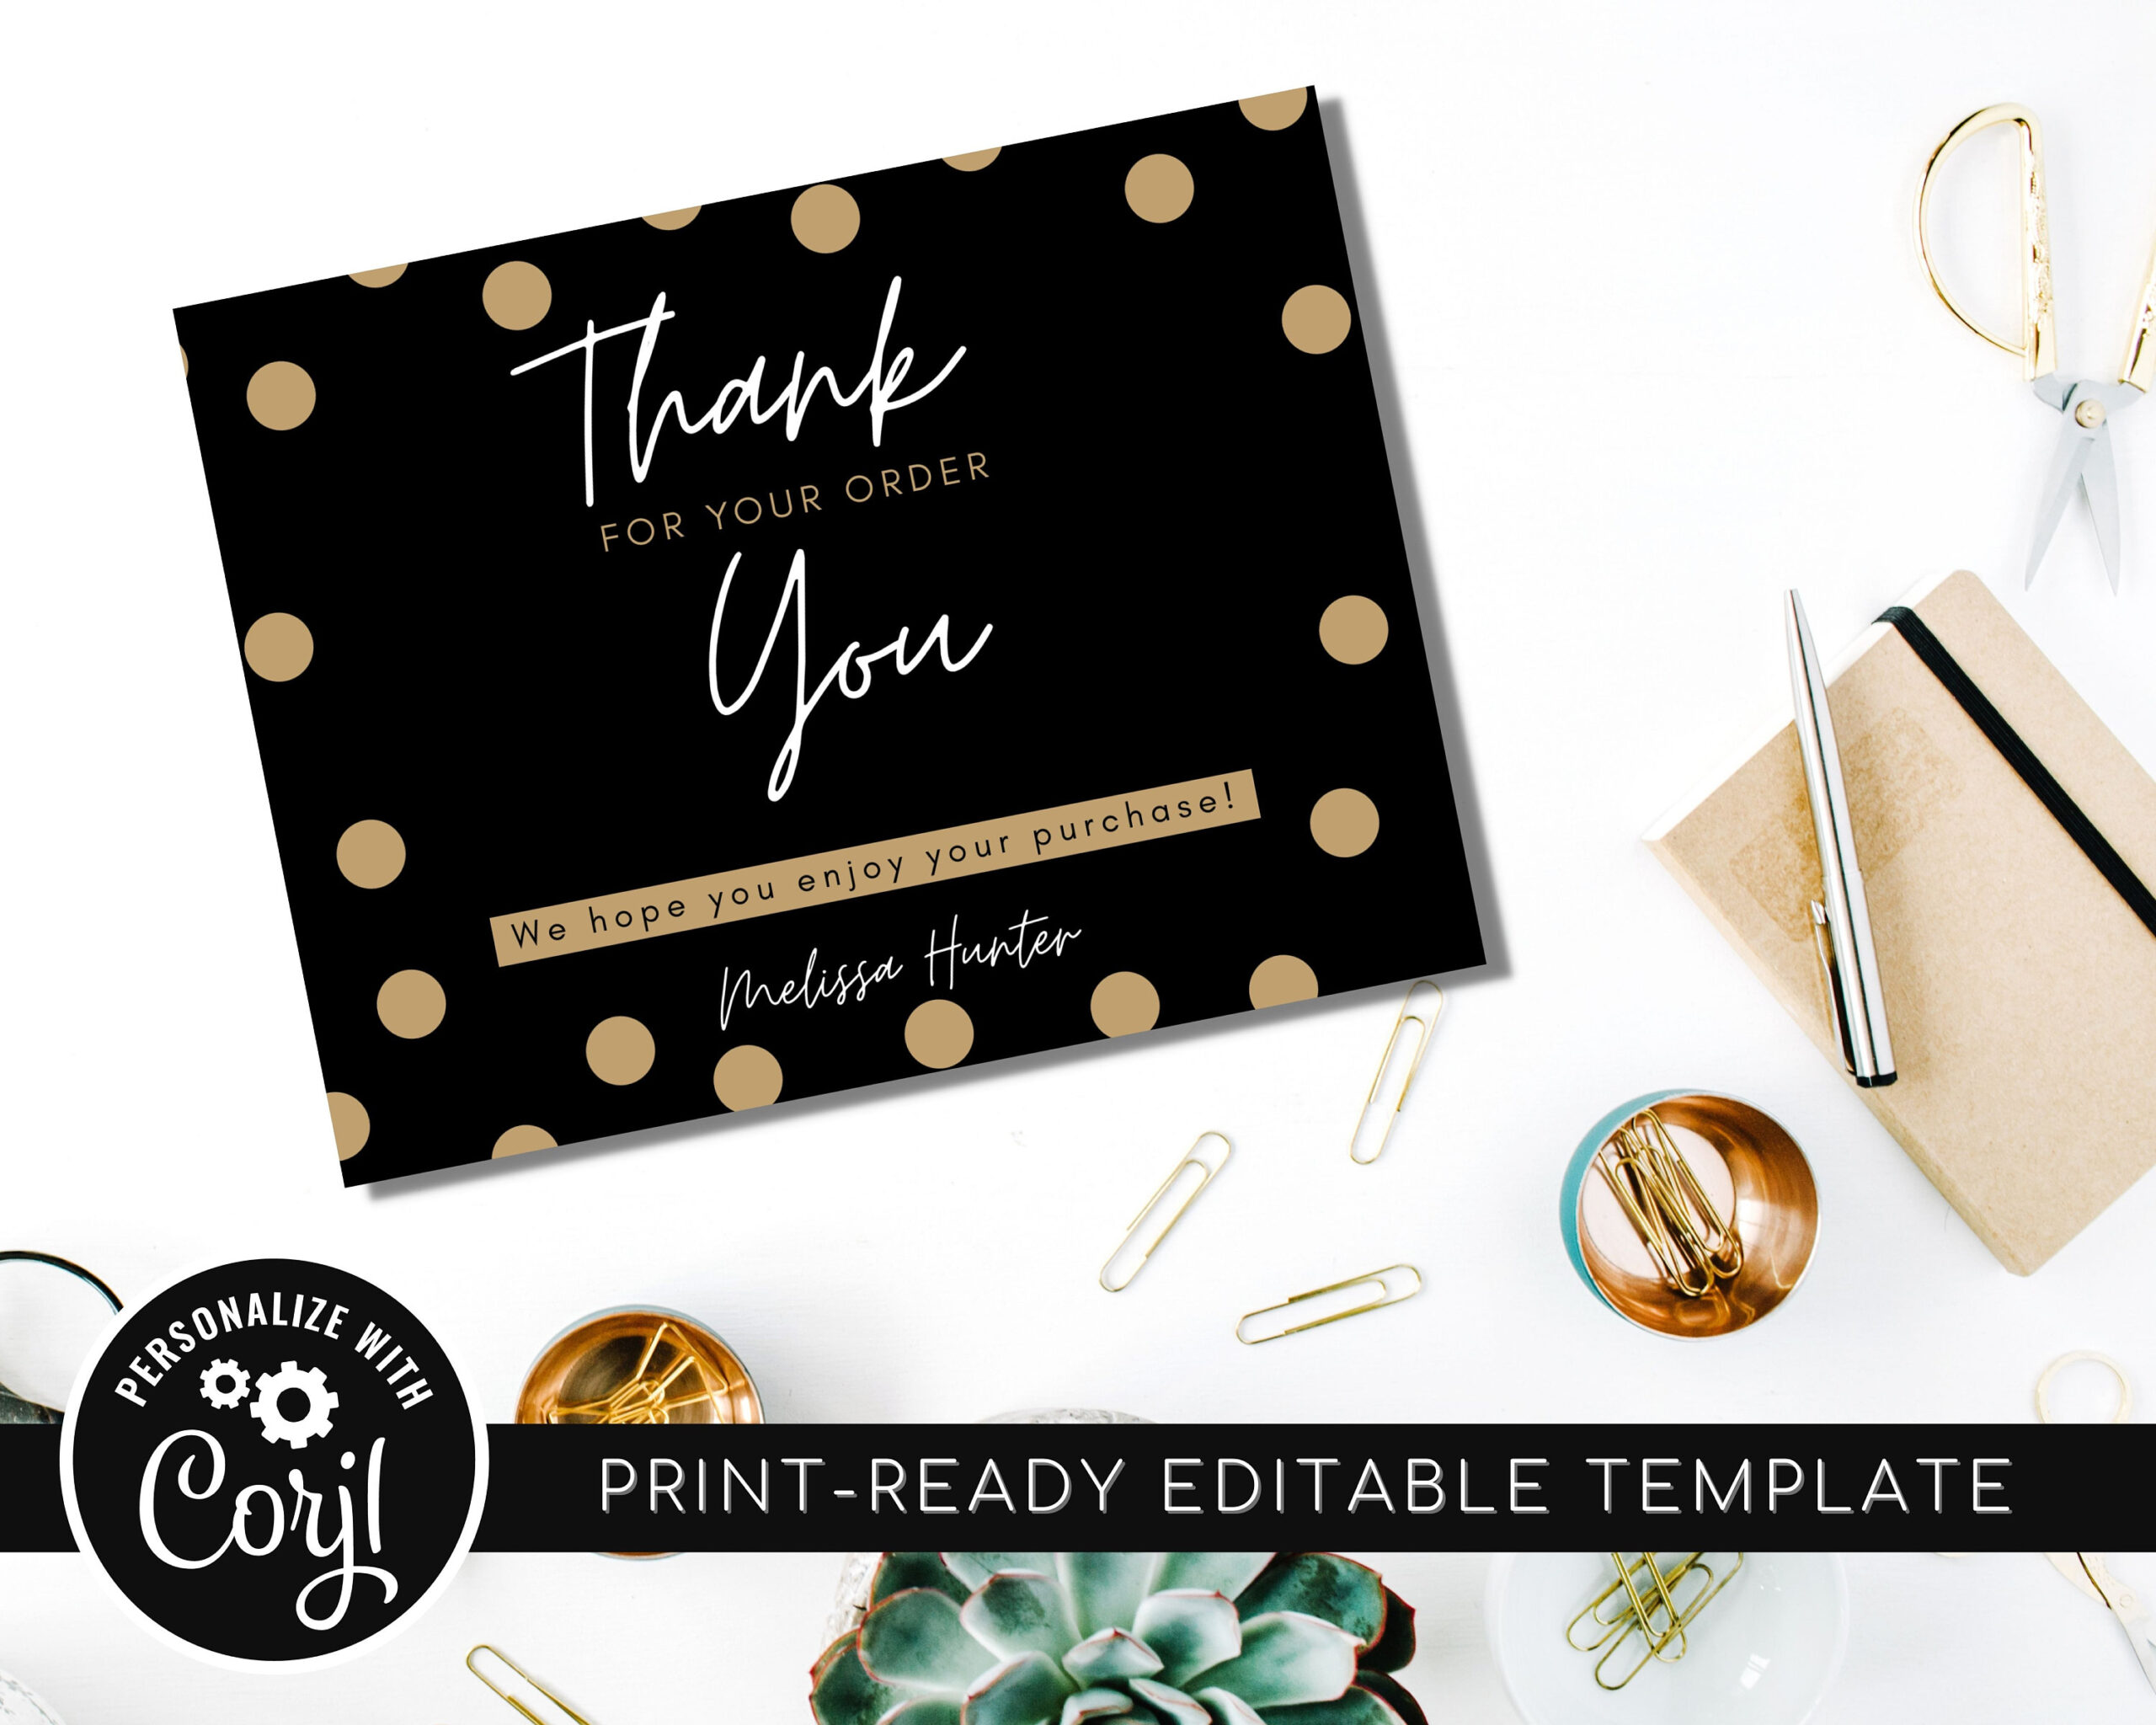 EDITABLE Thank You Card Template -  Vintage Polka Dots Card - Prnt-Ready -  High-Quality Instant Download - Edit & Print - Try before you buy